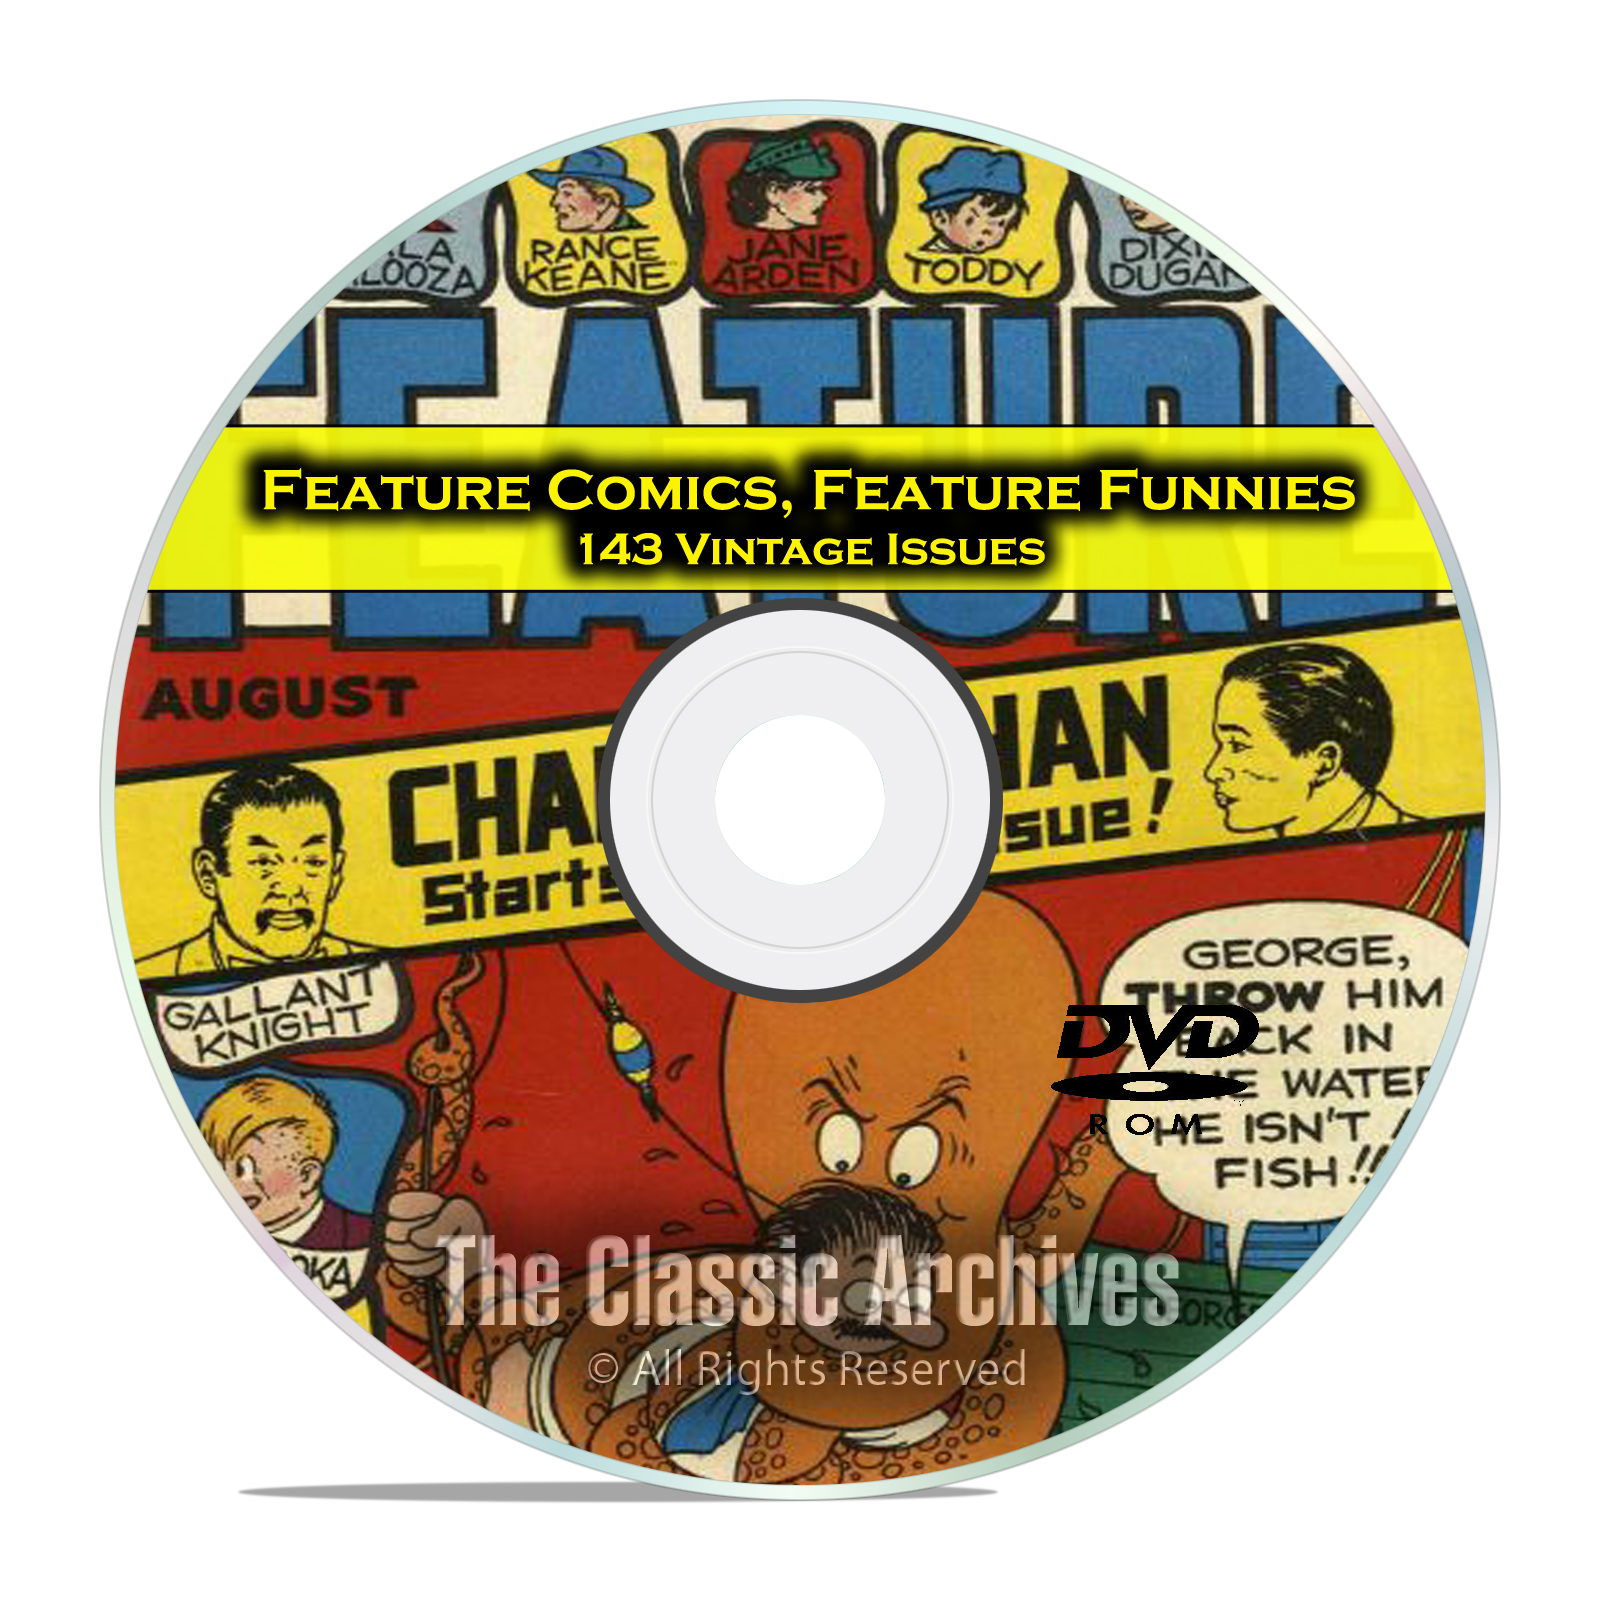 Feature Comics and Feature Funnies, 143 Issues, Golden Age Comics PDF DVD - Click Image to Close